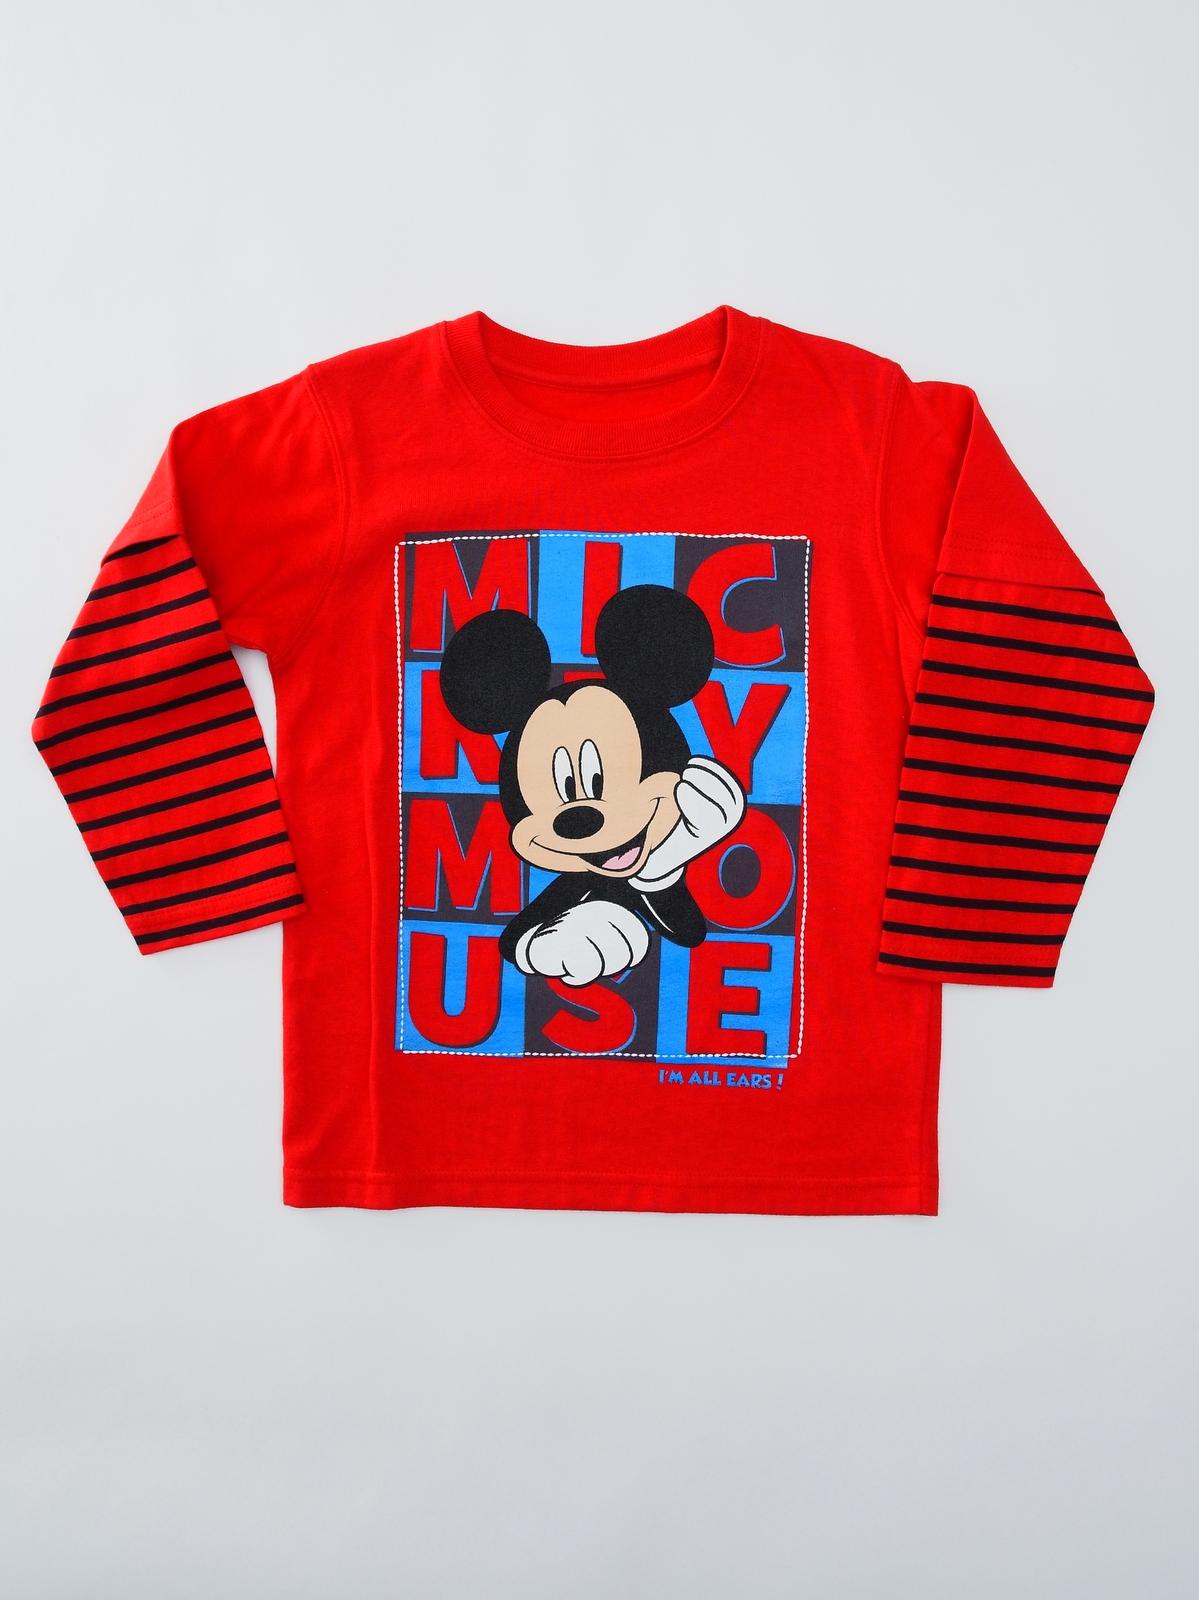 Disney Toddler Boy's Layered-Look Graphic T-Shirt - Mickey Mouse